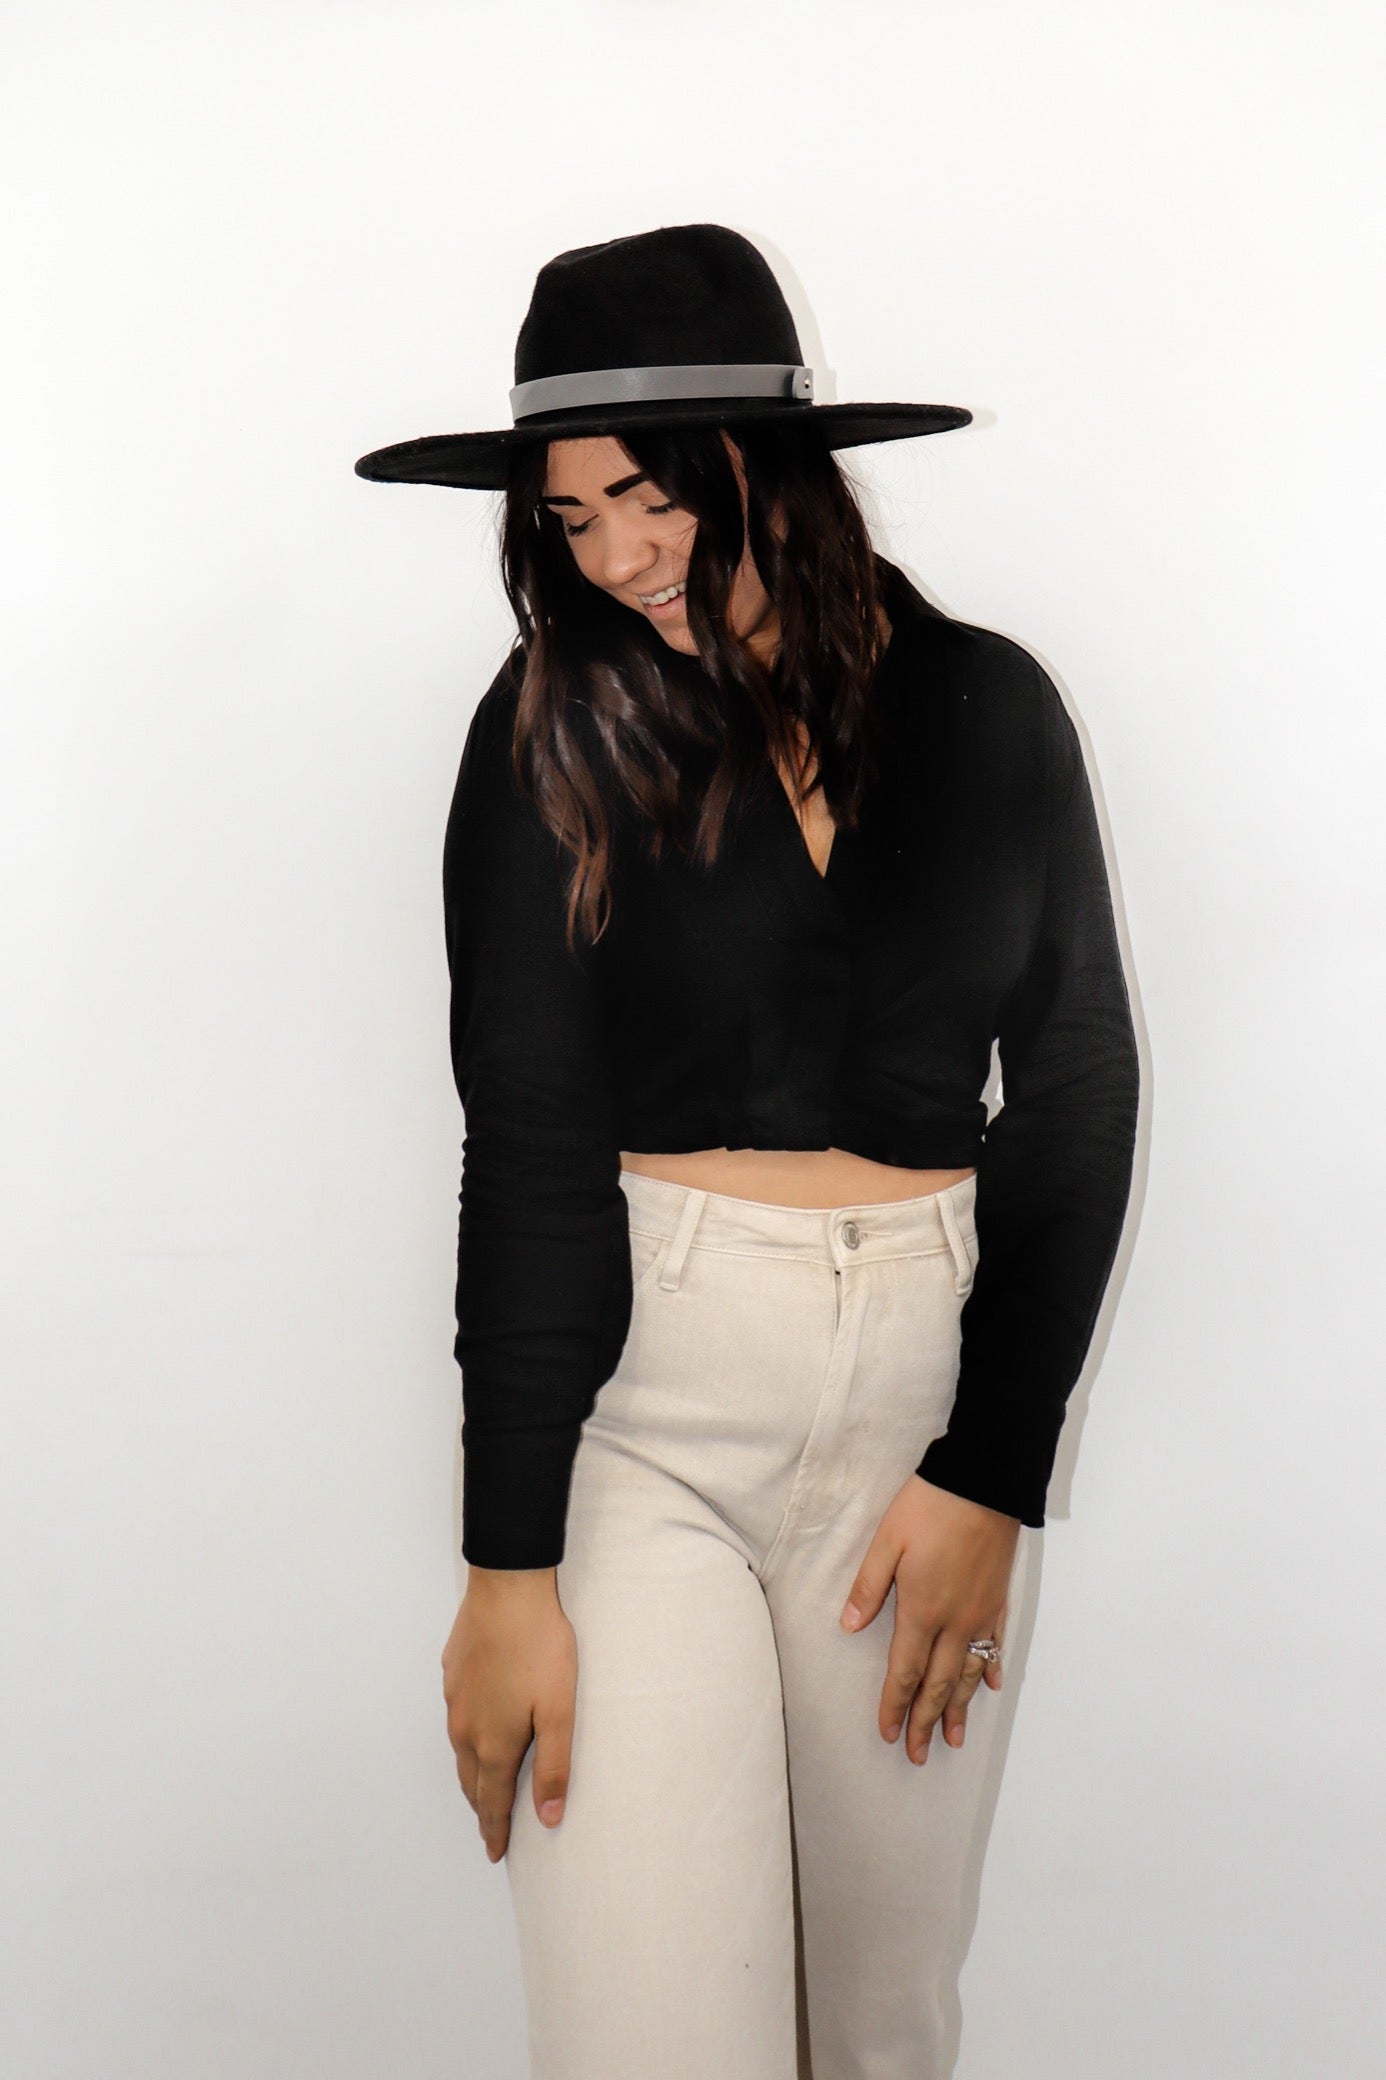 model wearing the all this time top paired with a pair of cream colored denim jeans and a black rancher style hat. model is smiling, looking downward and off toward the side, and resting her hands on her thighs.